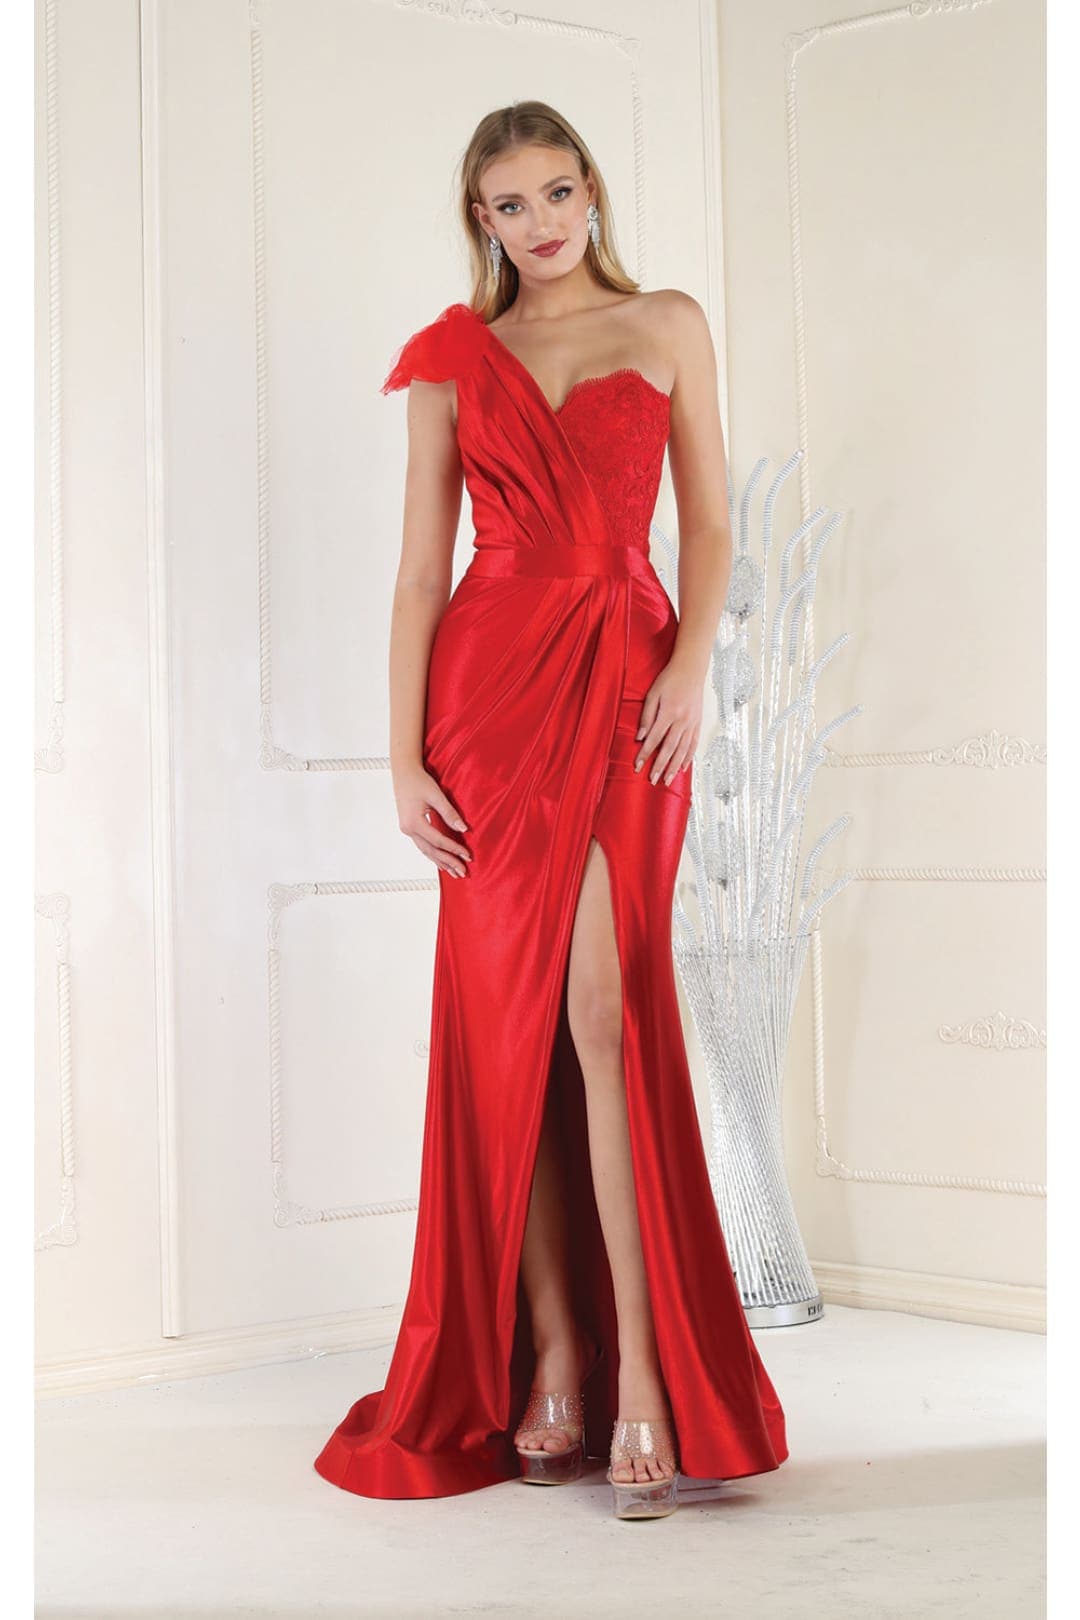 Royal Queen RQ7962 One Shoulder Red Carpet Gown - Dress